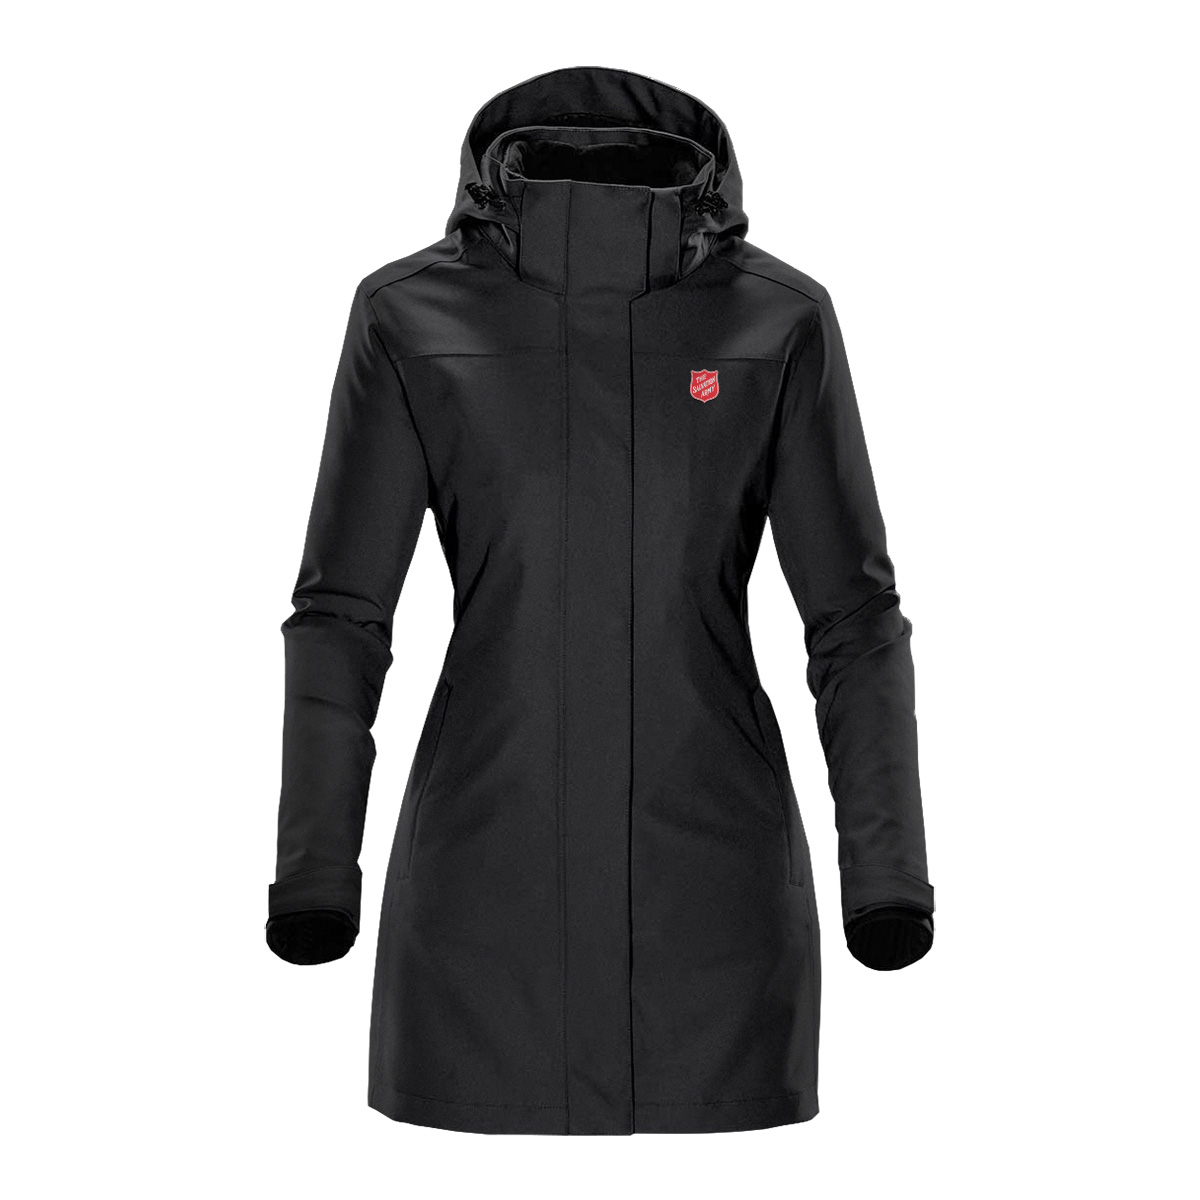 https://store.salvationarmy.ca/wp-content/uploads/2022/11/5-in-1-lady-front.jpg